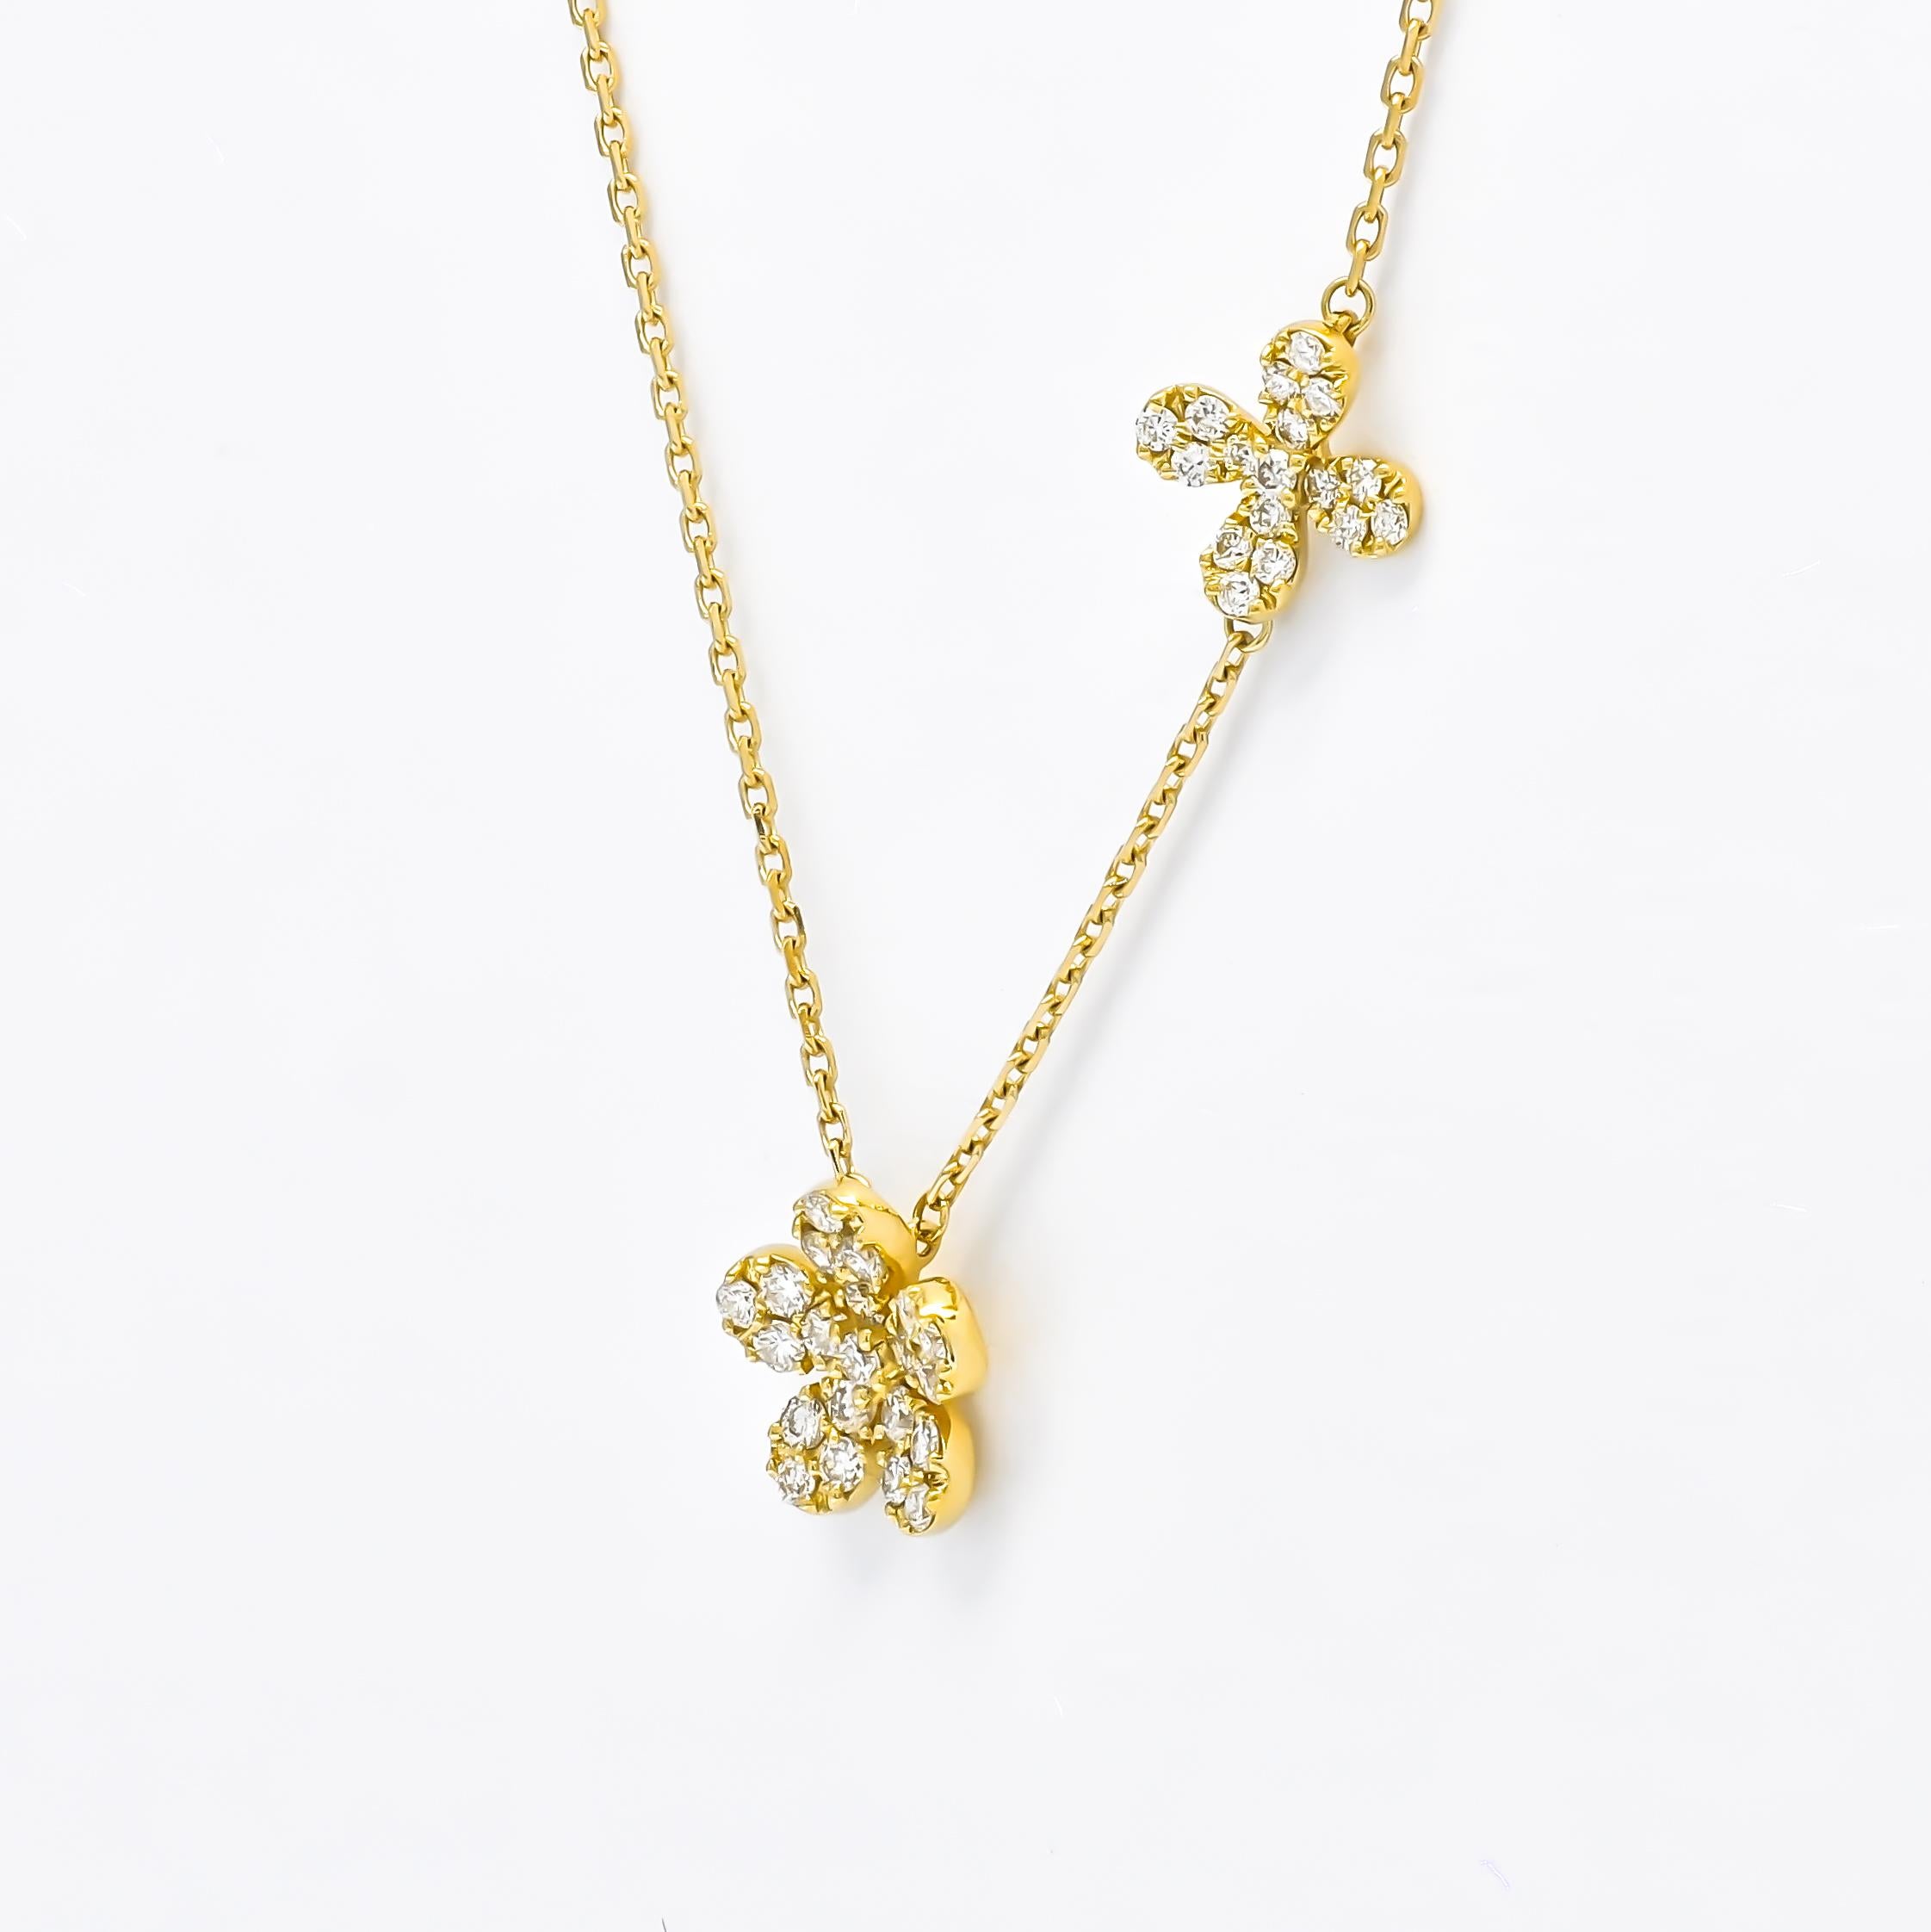 This exquisite necklace captures the essence of elegance, combining the brilliance of diamonds with the timeless allure of 18-karat gold.

At the heart of this pendant necklace lies a delicate and intricately designed flower motif. The petals of the